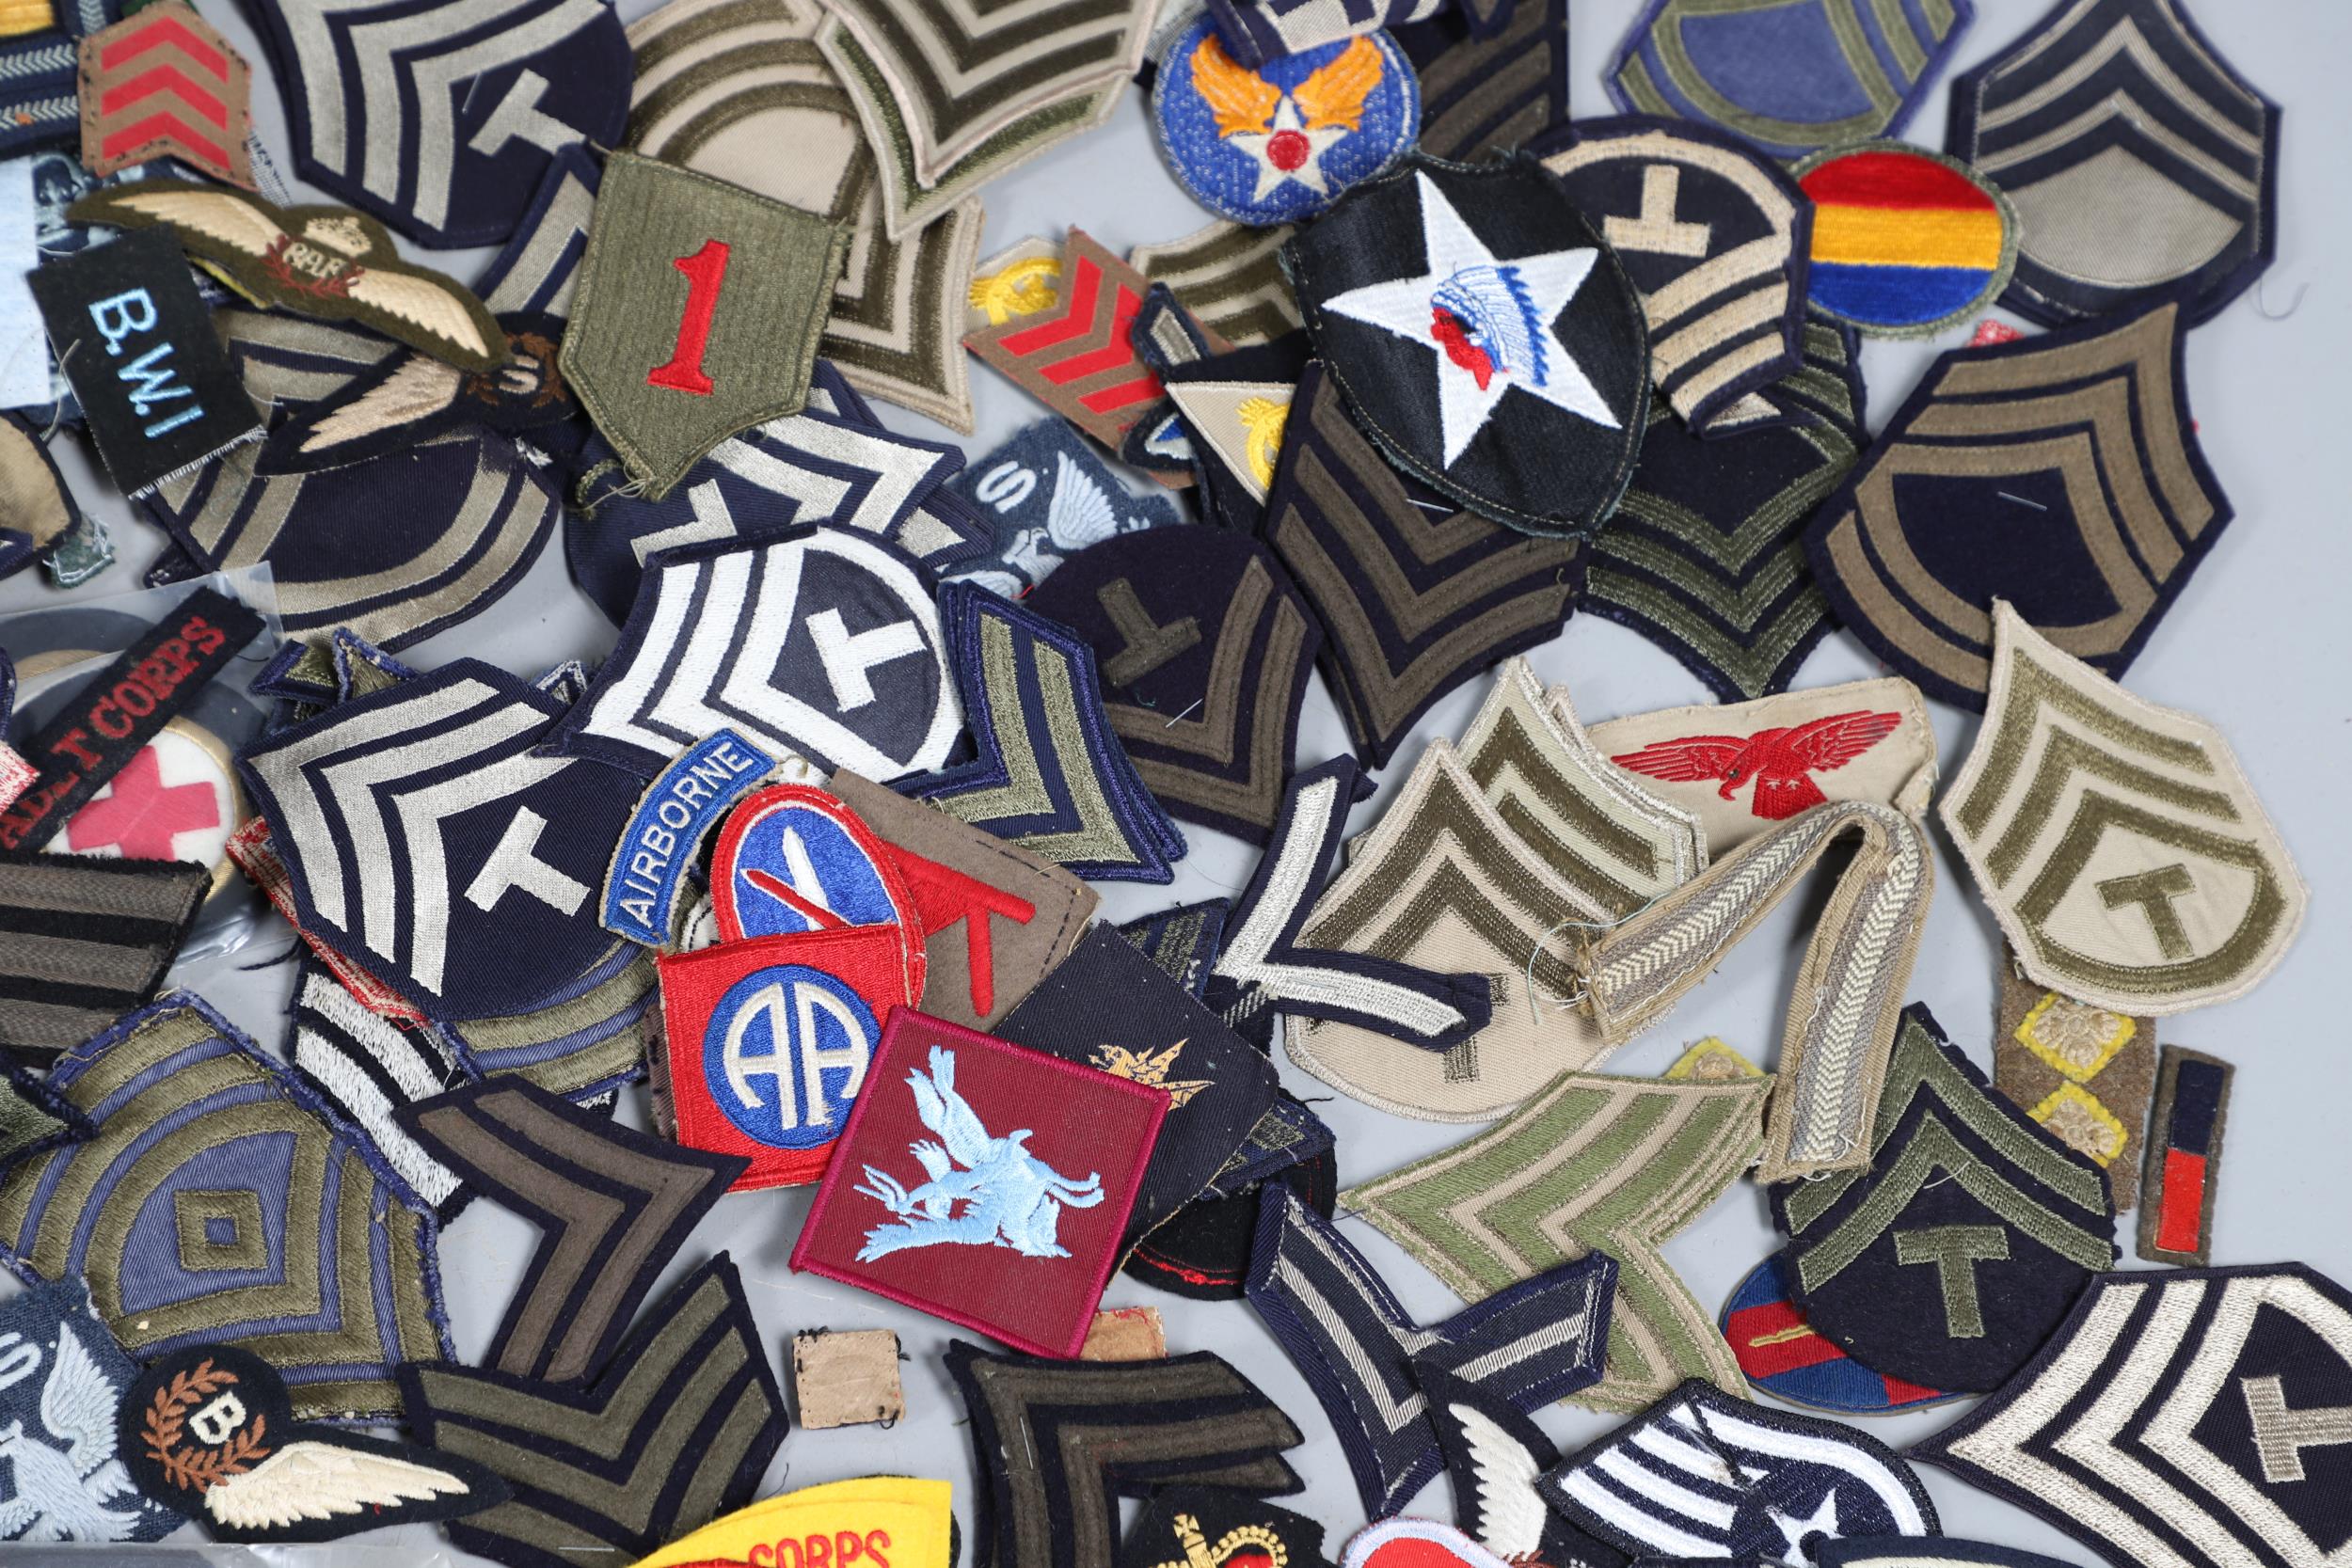 AN EXTENSIVE COLLECTION OF ARMY AND AIR FORCE UNIFORM PATCHES AND RANK INSIGNIA. - Image 12 of 14